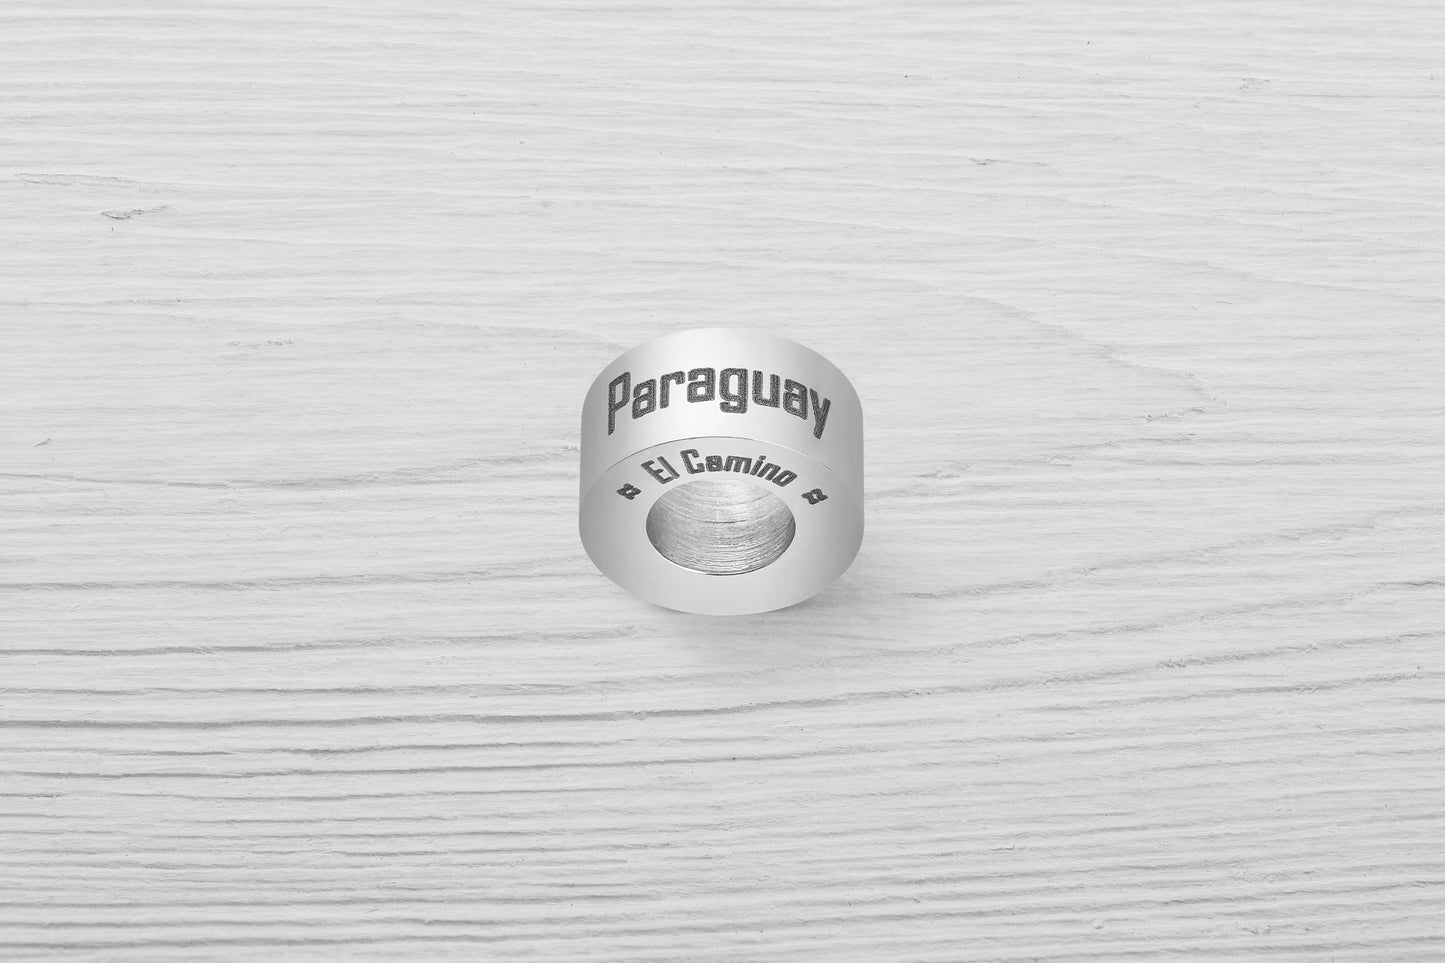 El Camino Paraguay Country Step Travel Charm Bead